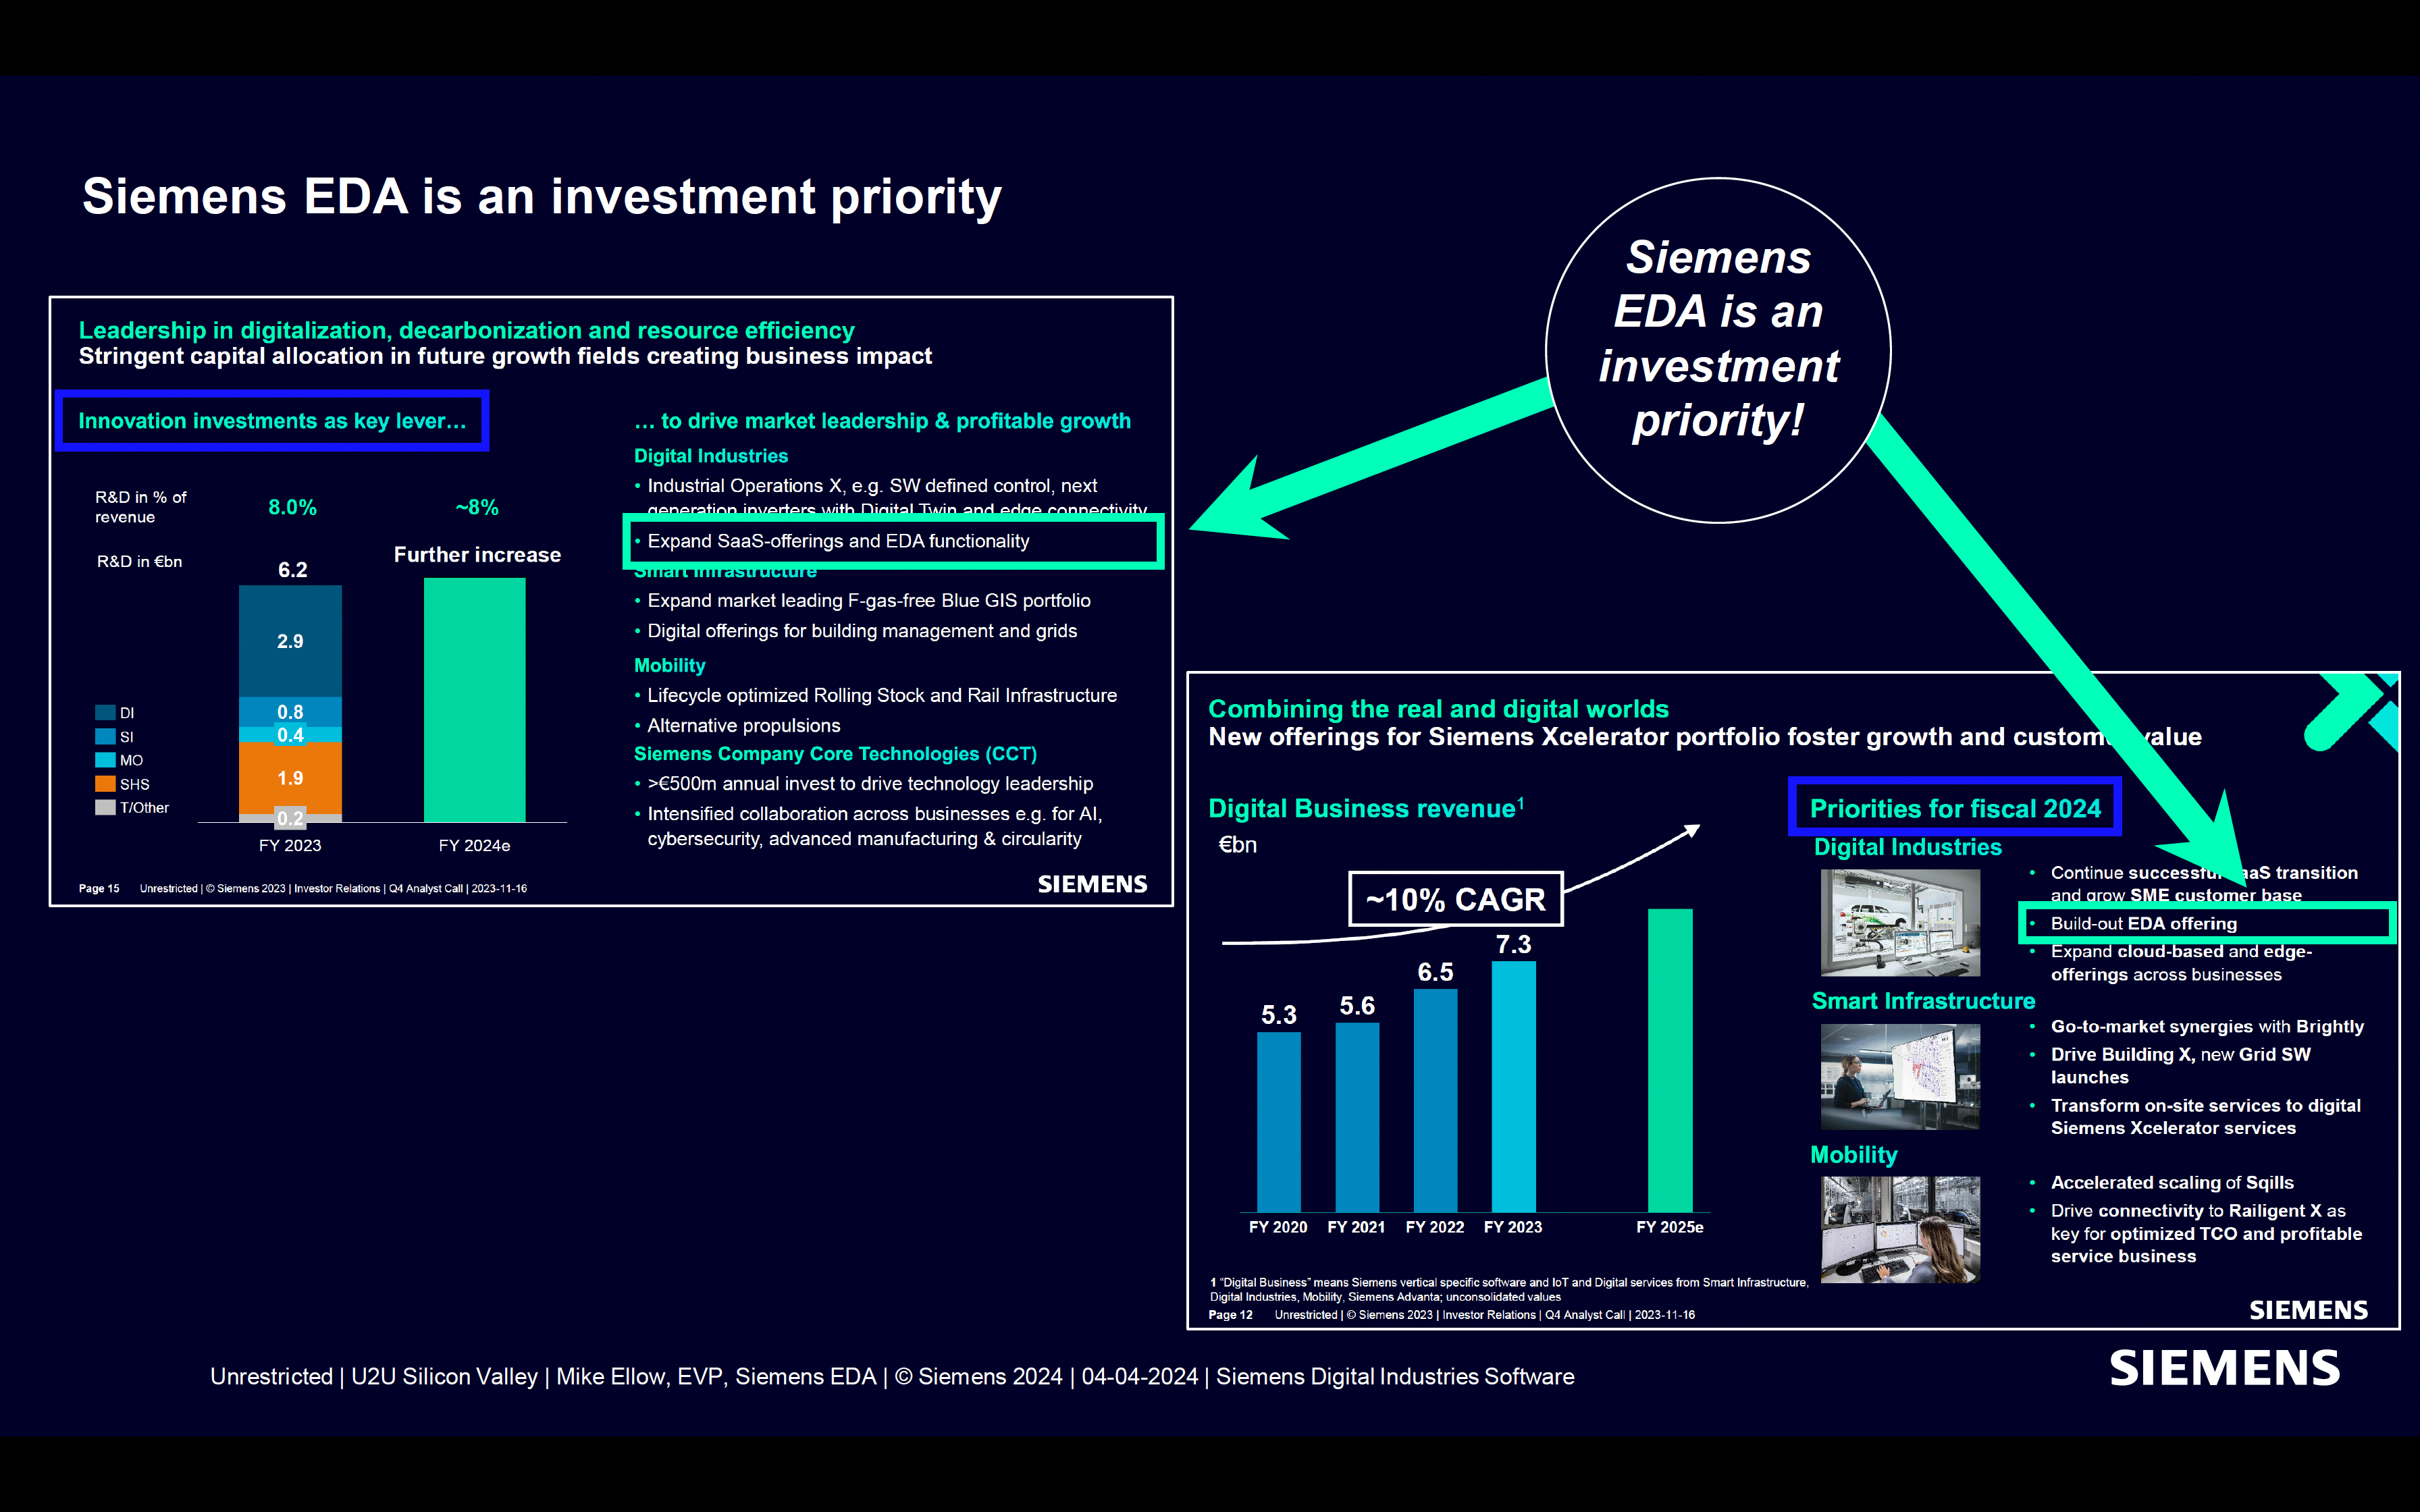 Siemens EDA is an investment priority